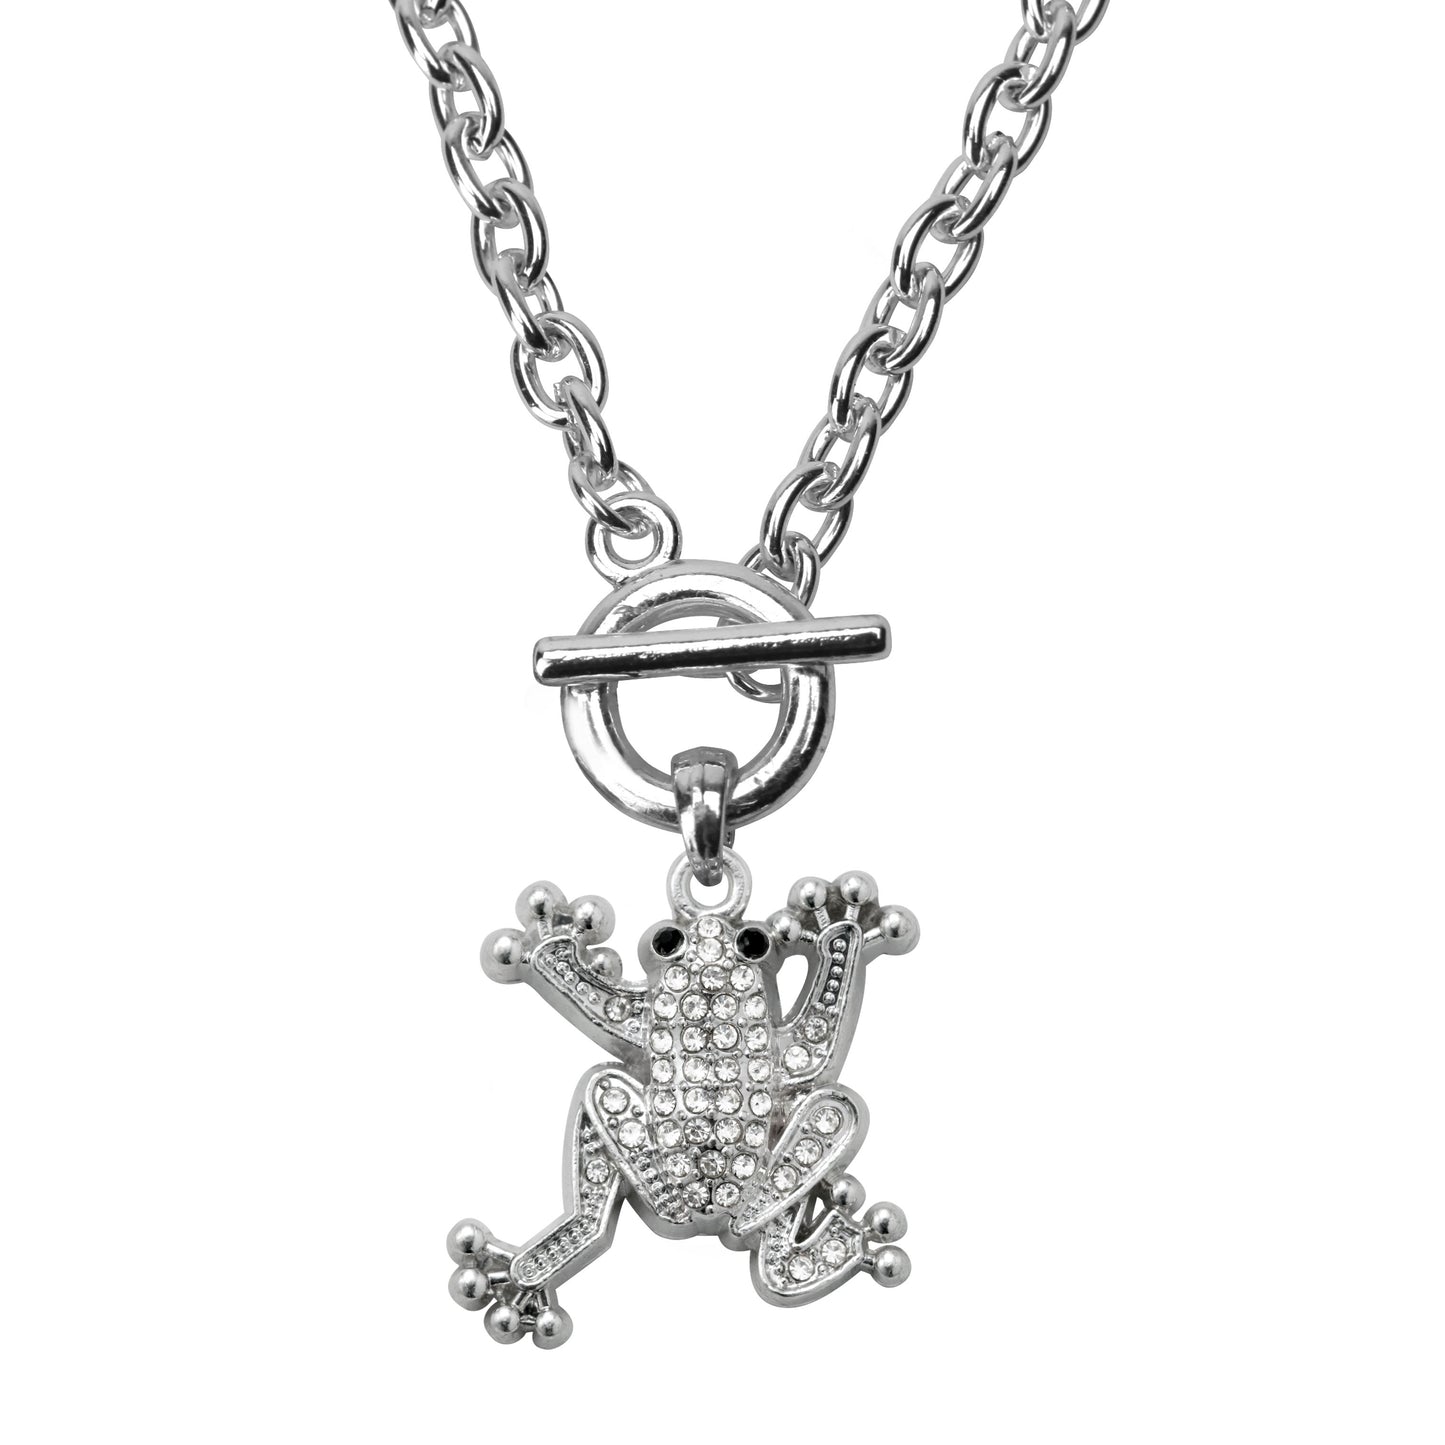 Silver Frog Charm Toggle Necklace